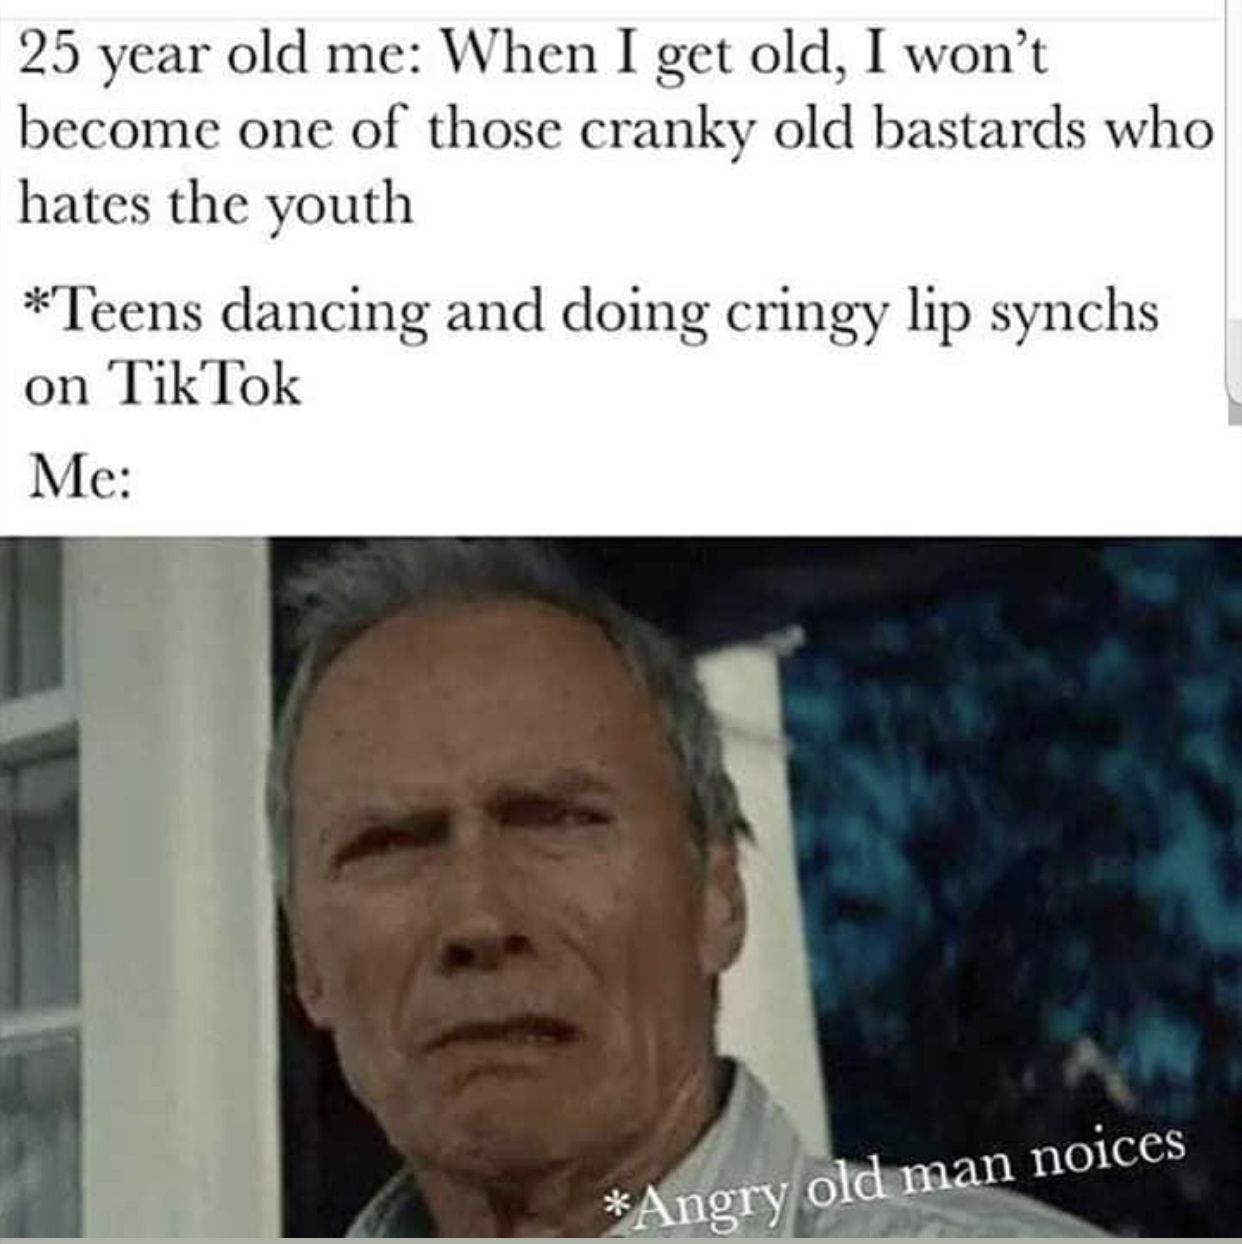 photo caption - 25 year old me When I get old, I won't become one of those cranky old bastards who hates the youth Teens dancing and doing cringy lip synchs on TikTok Me Angry old man noices